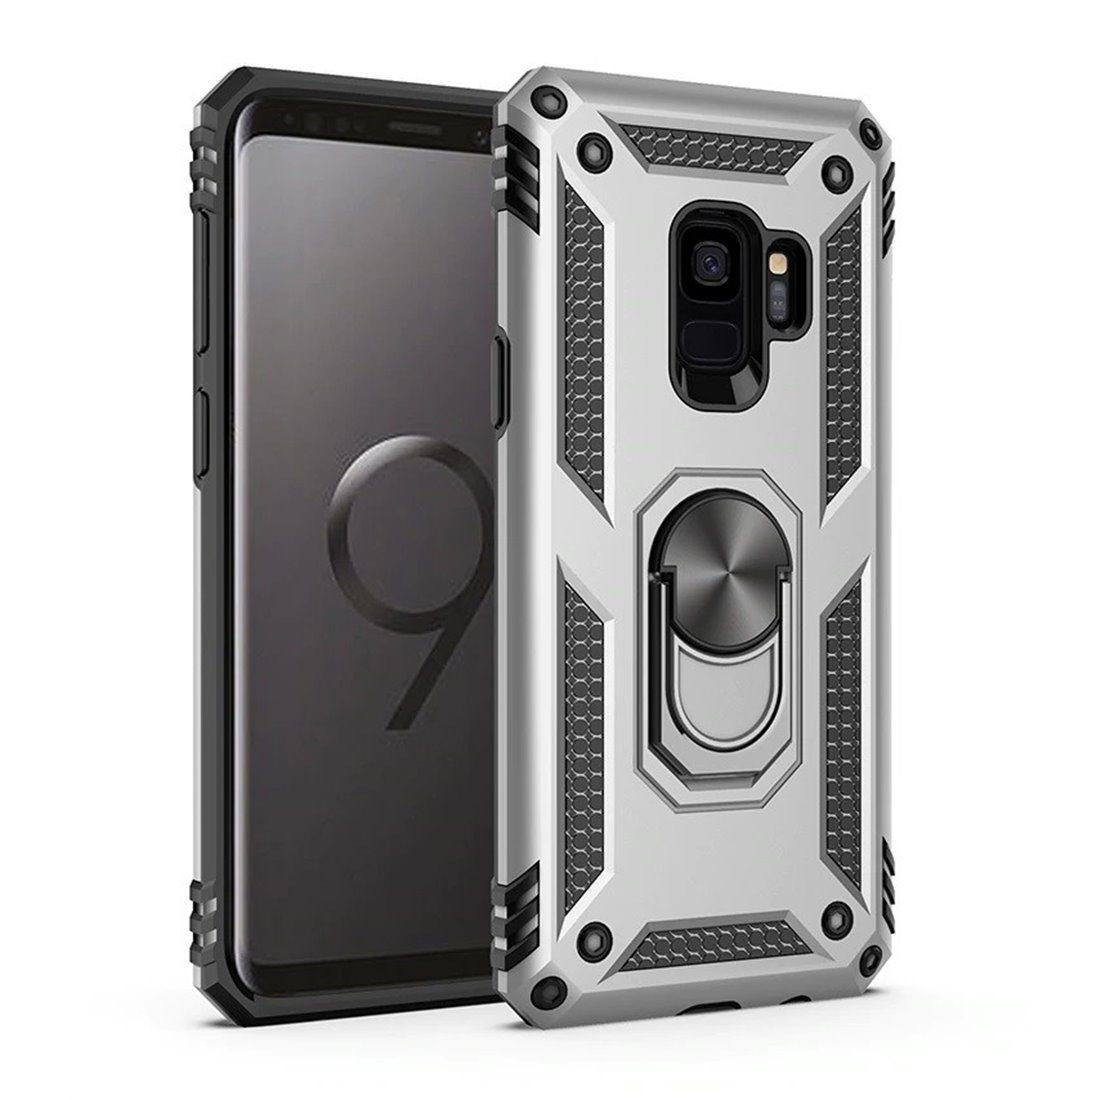 Samsung Galaxy S9 plus Plastic Silver Back Cover - Solid ring